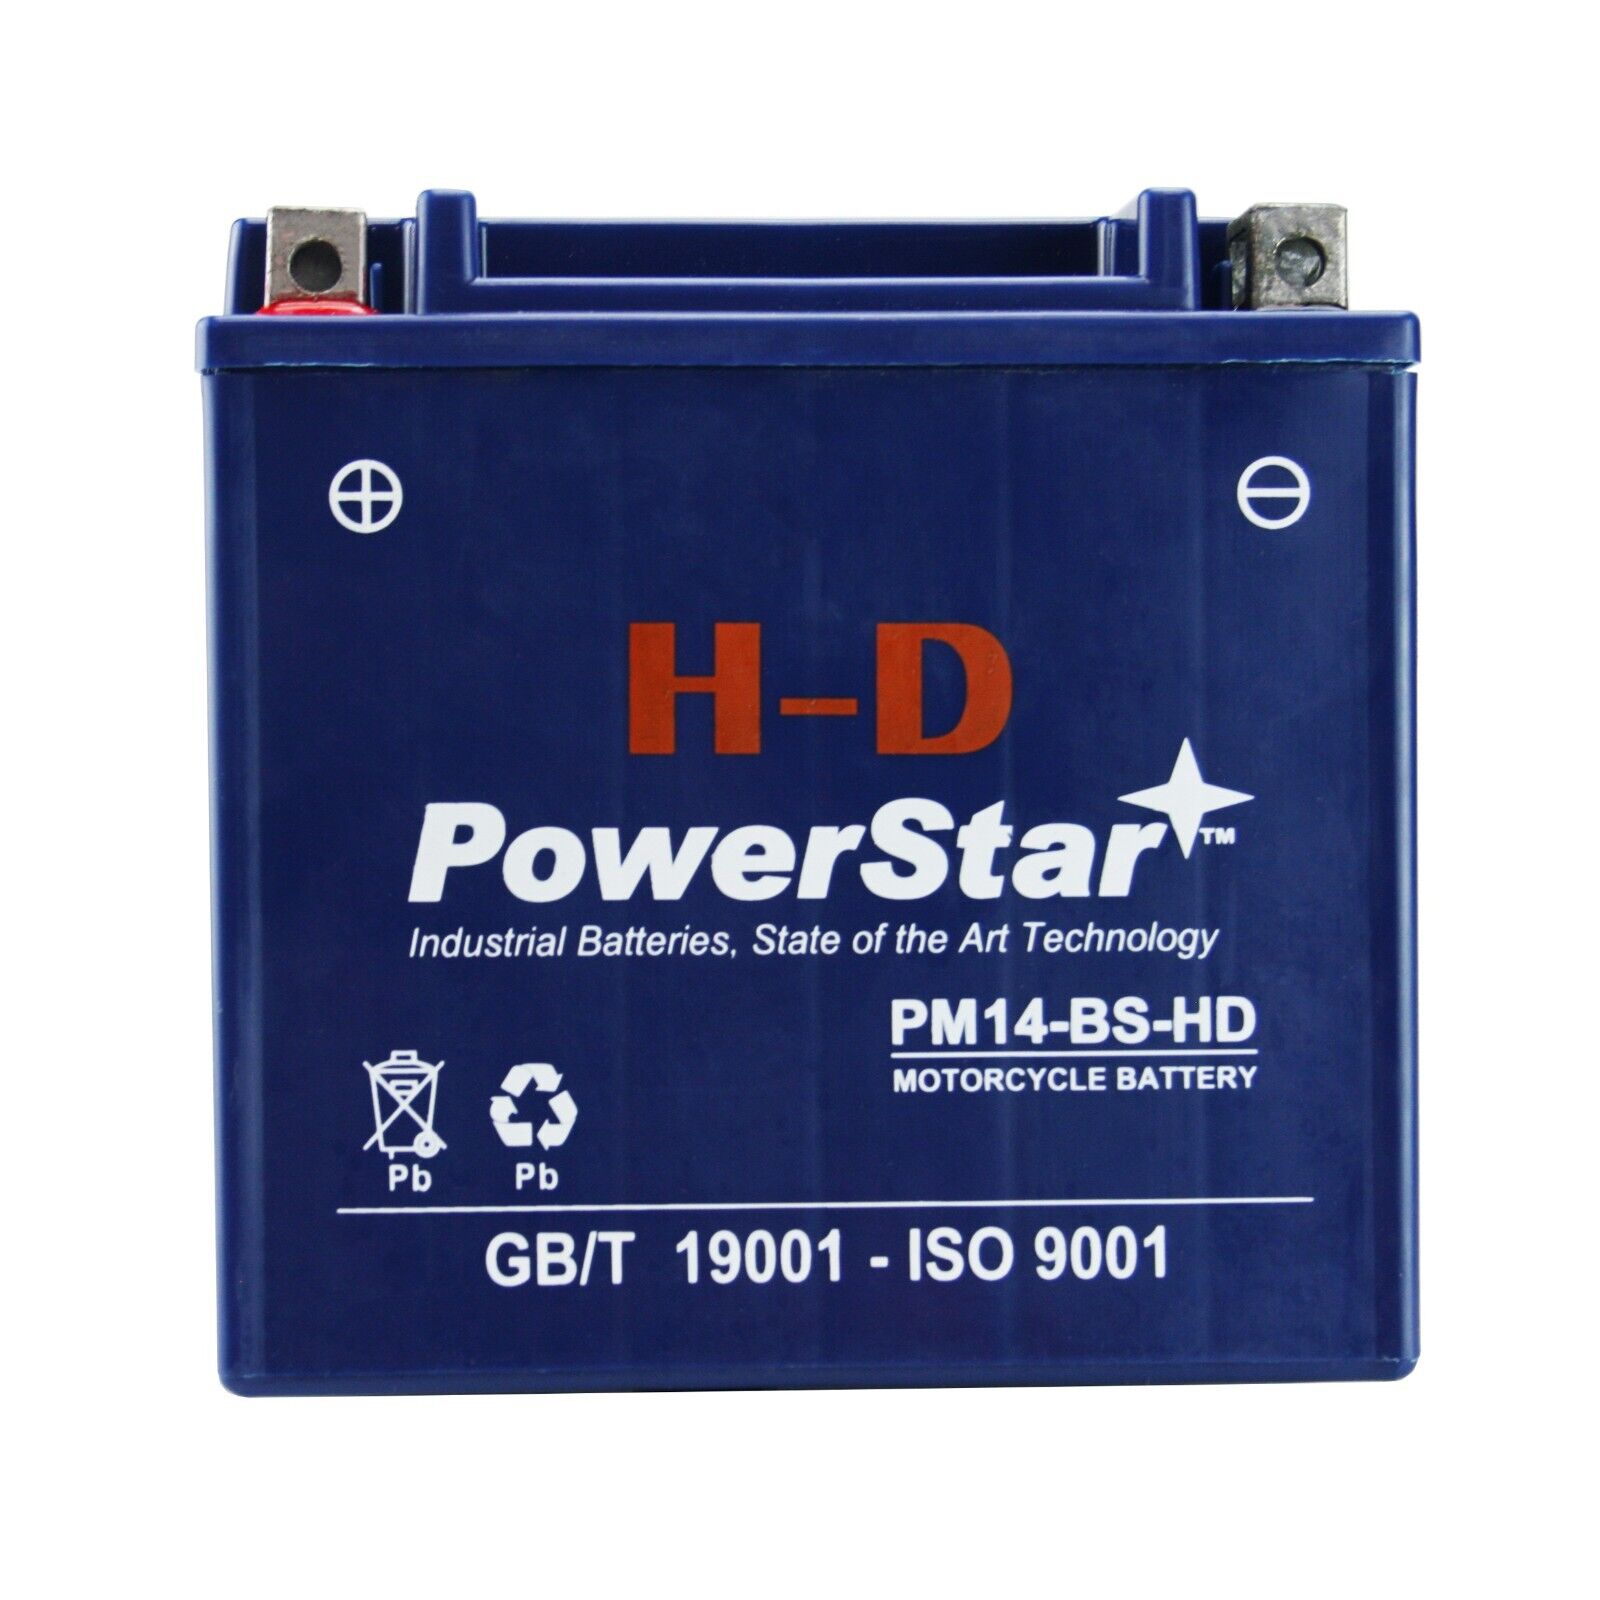 PowerStar H-D YTX14-BS Motorcycle Battery For BMW R1200R 2006-2014